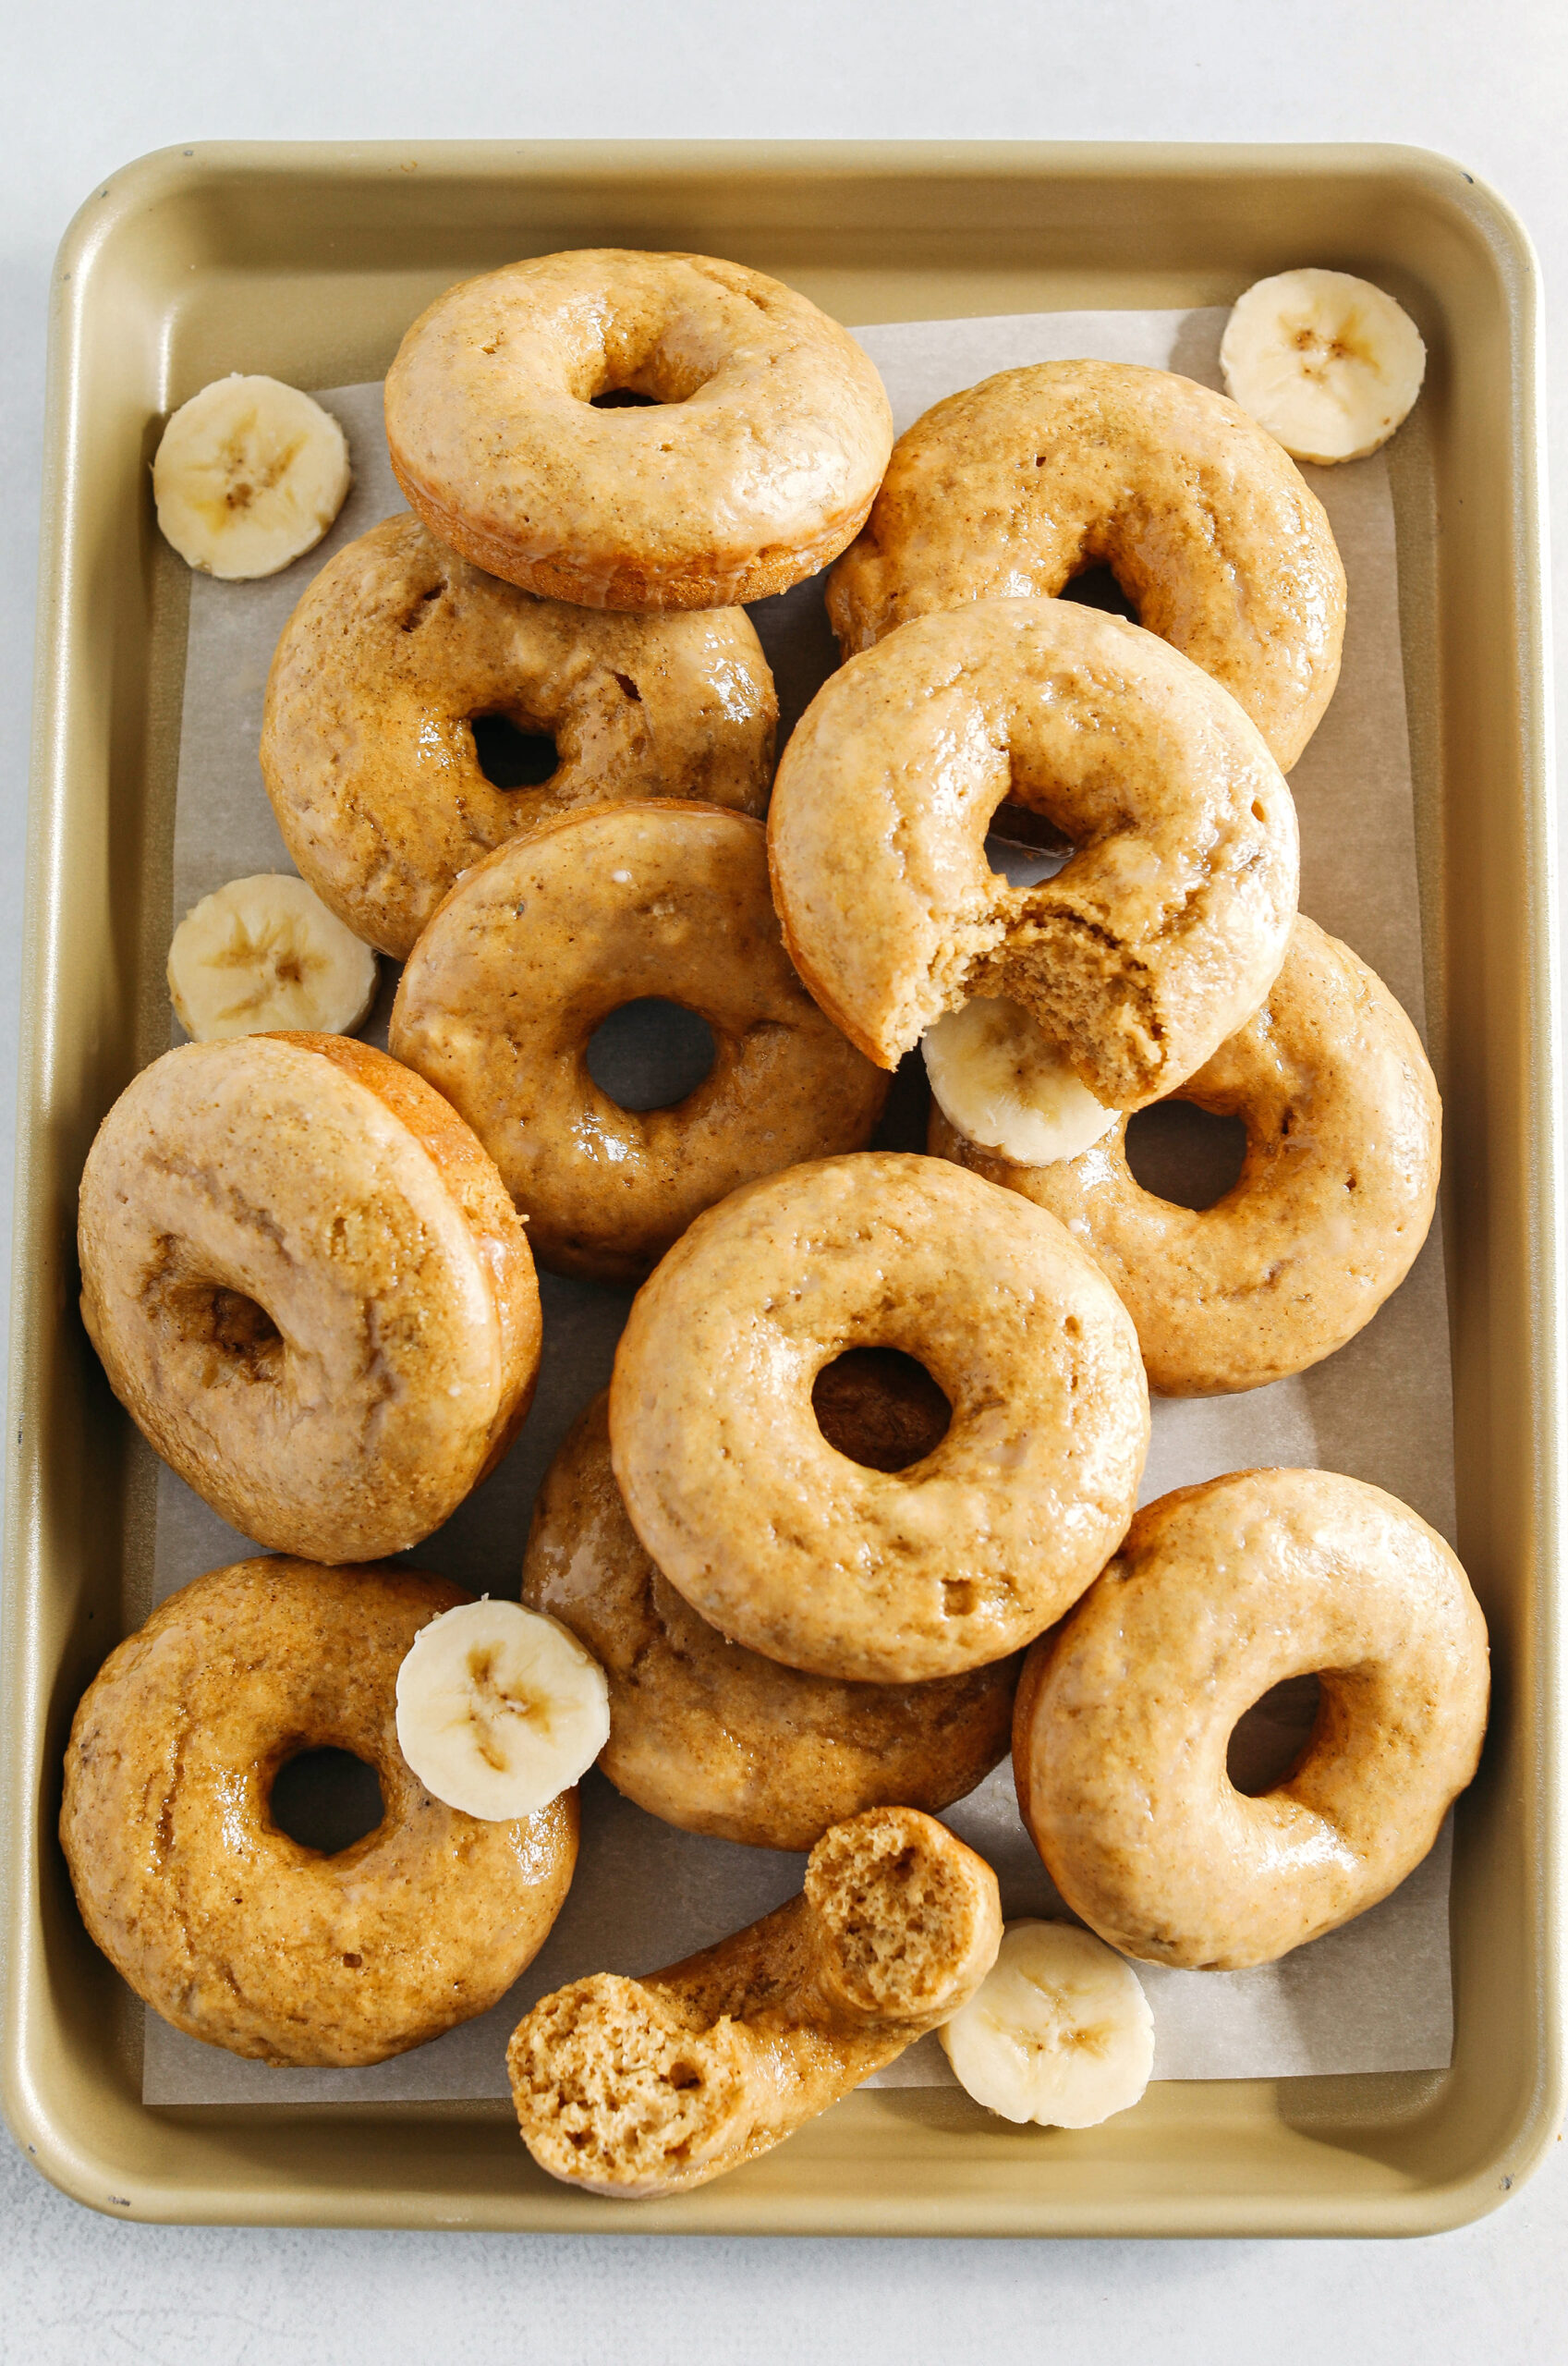 These Baked Banana Bread Donuts are soft, cake-like and made healthier with whole wheat flour, applesauce and zero refined sugar for the perfect morning treat that comes together in just 20 minutes!  Such a great way to use up those overripe bananas!